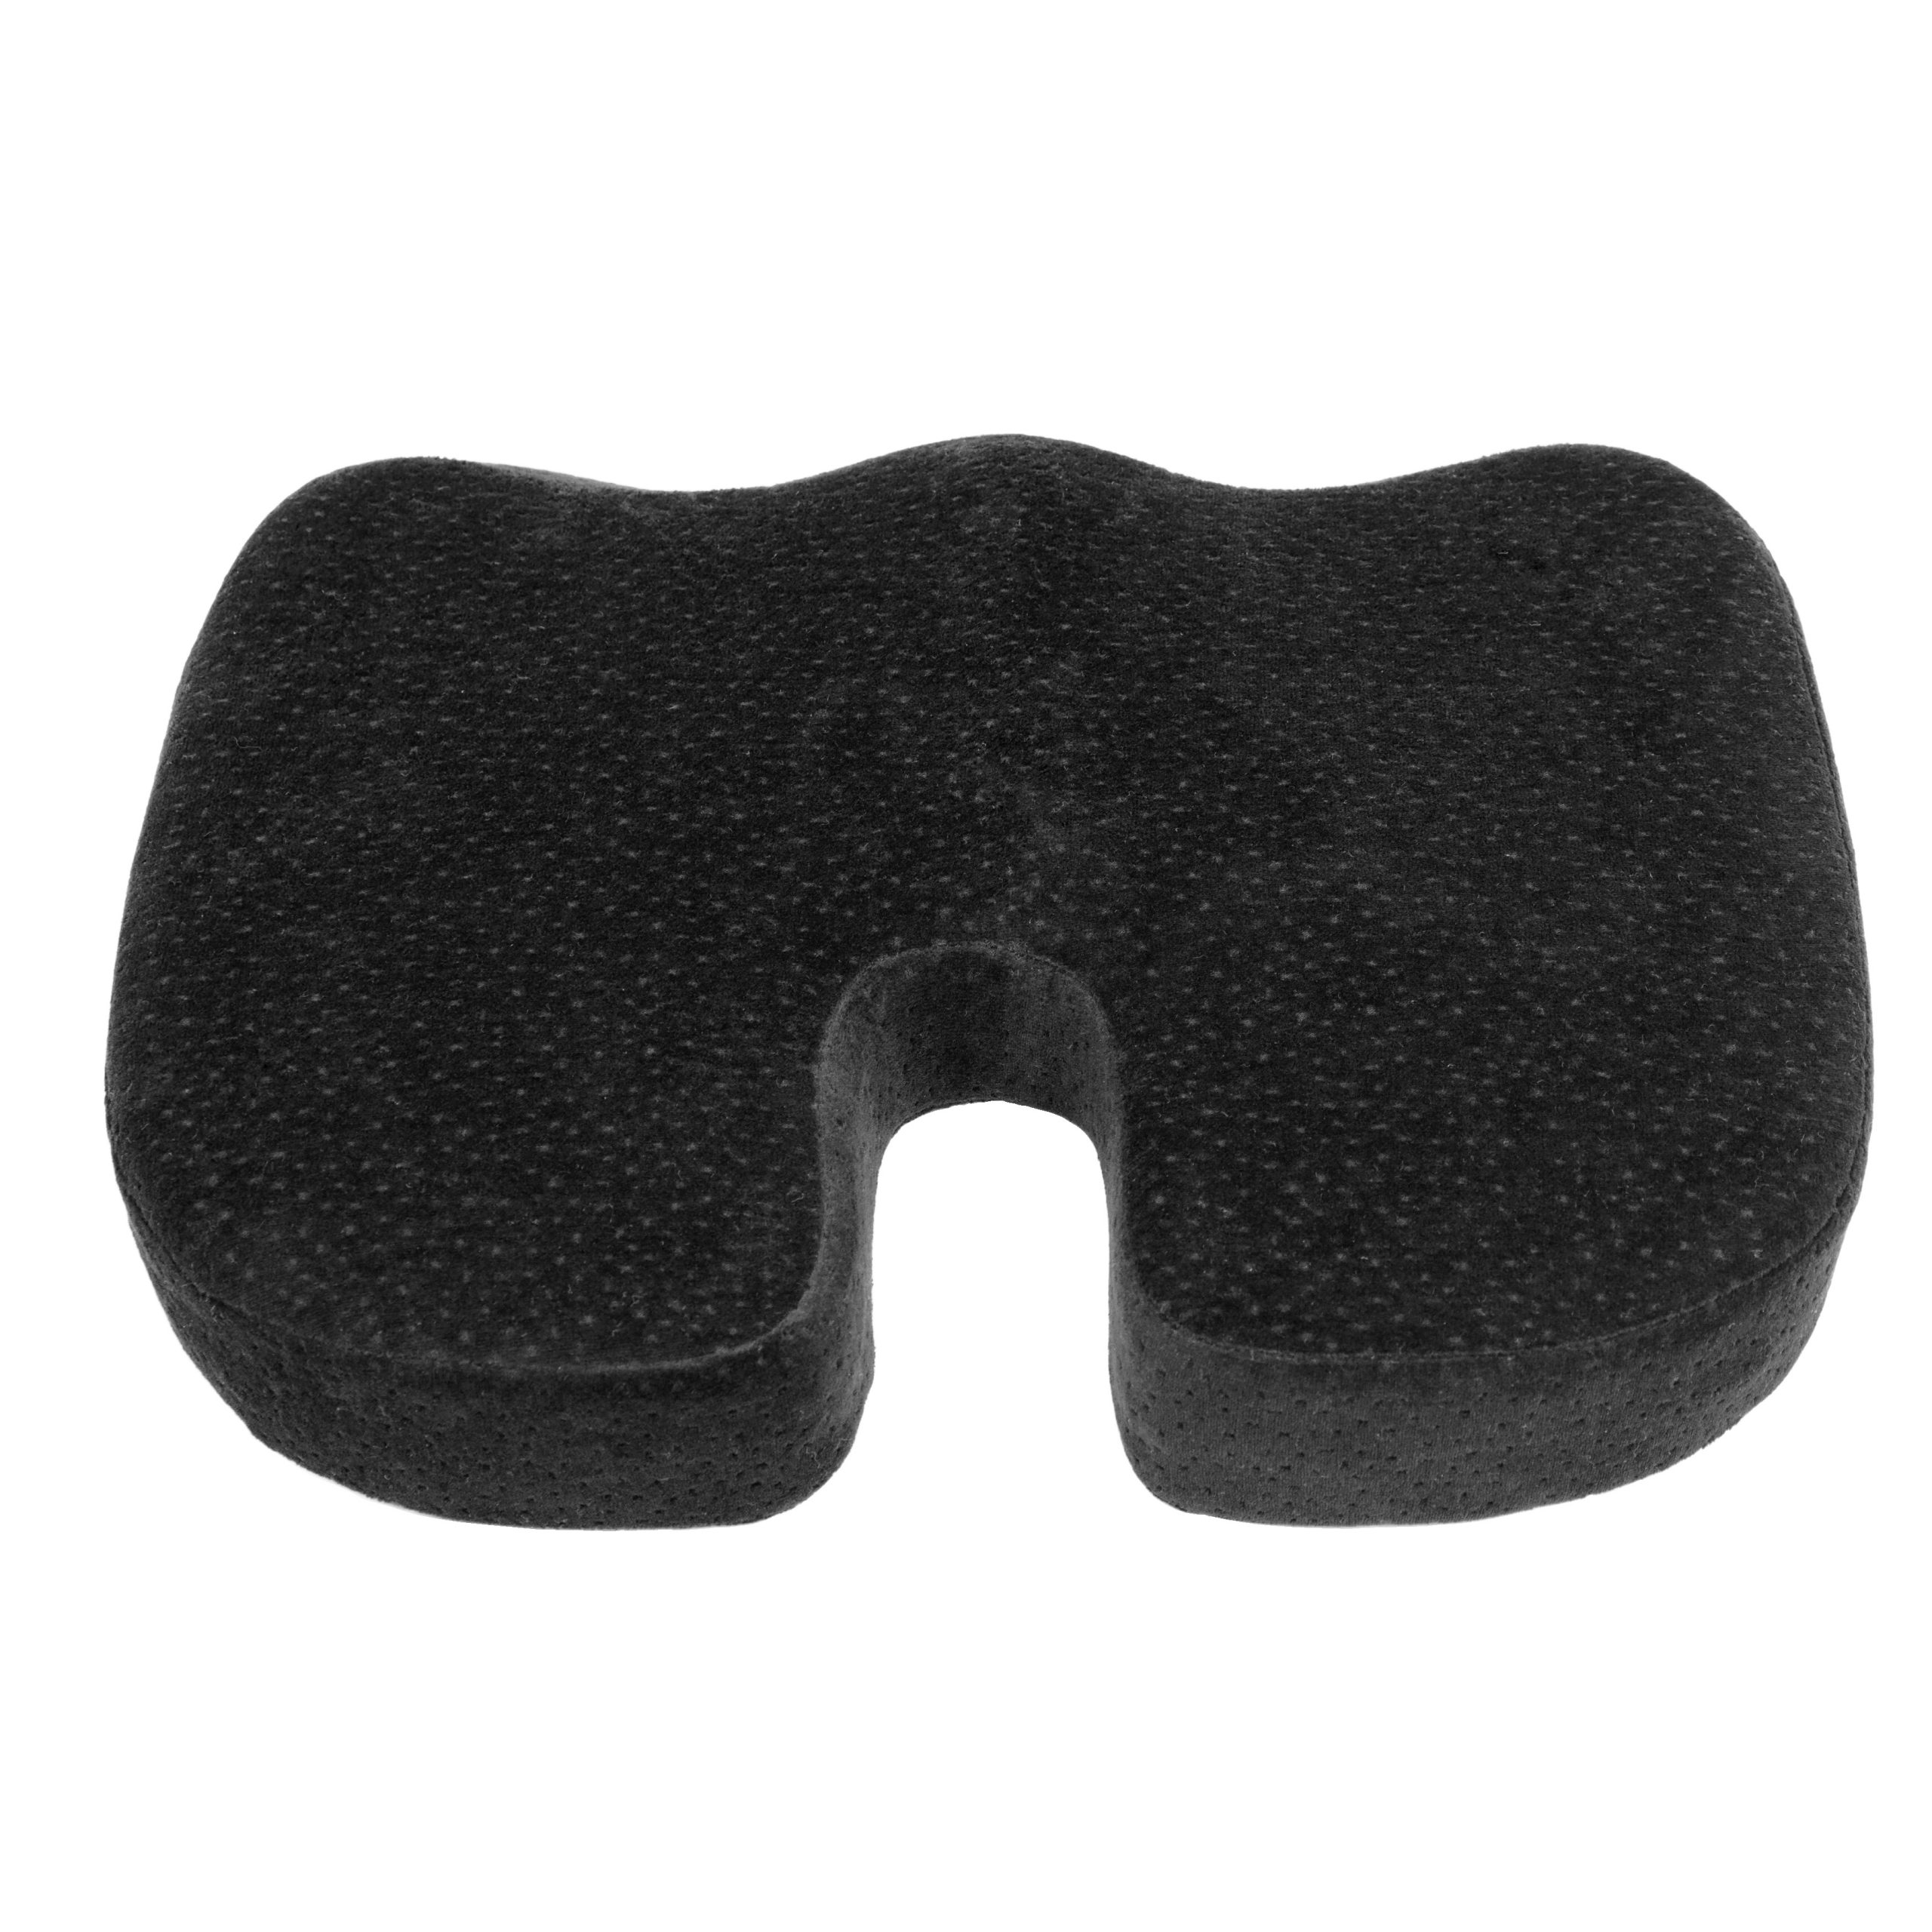 AURORA Black Memory Foam Coccyx Seat Cushion Orthopedically designed for Back, Tailbone and Sciatica Pain Relief; Promotes proper posture; Washable Cover